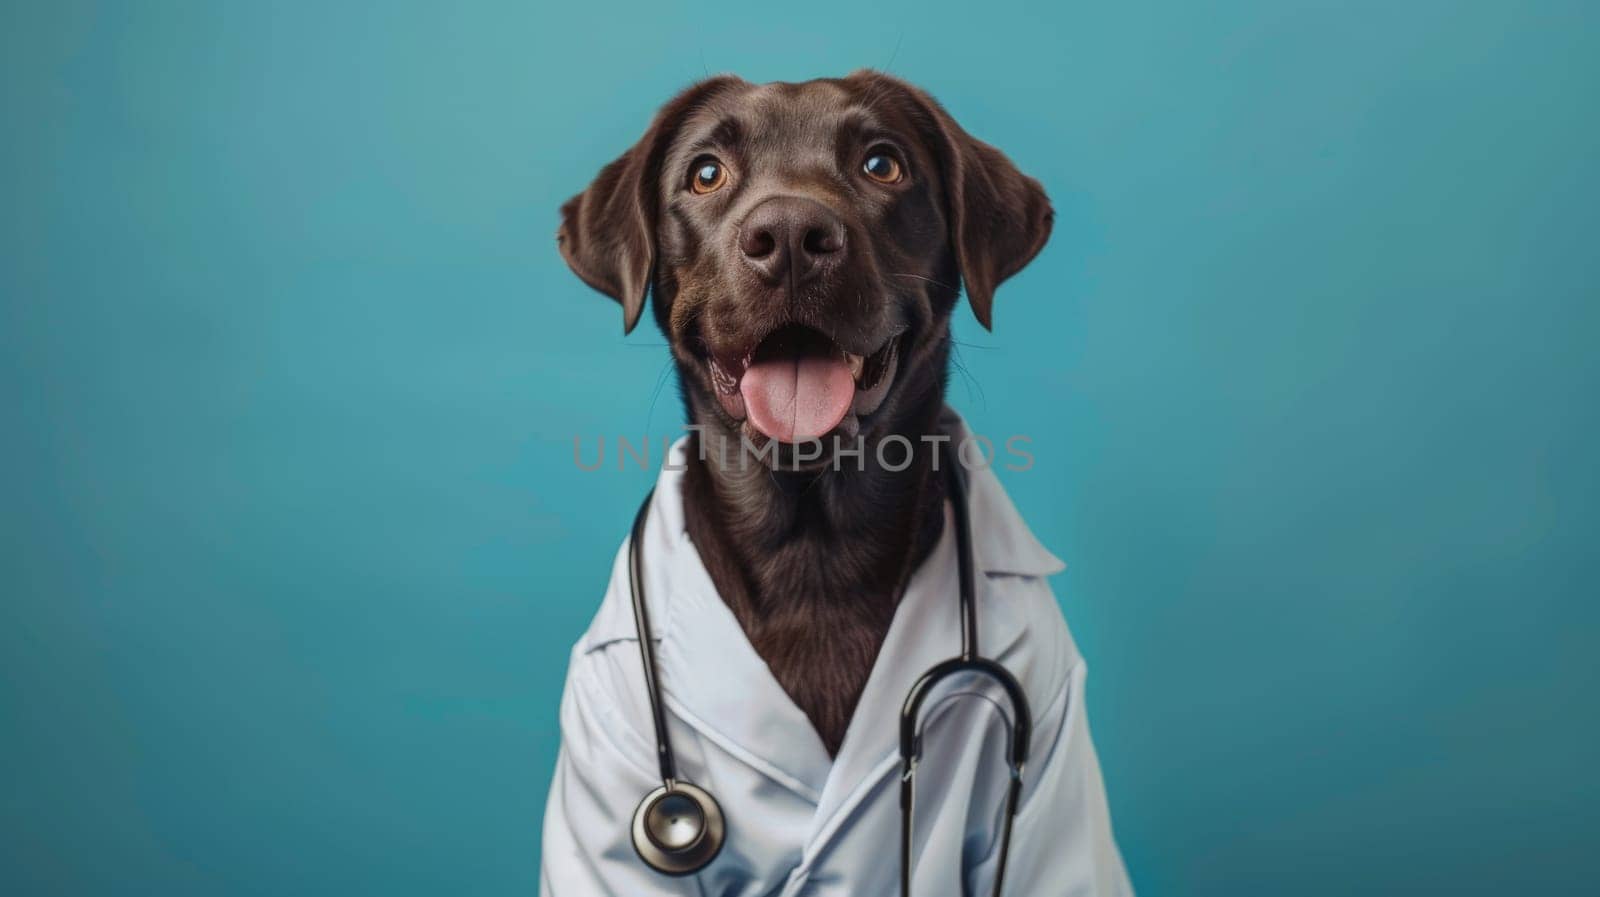 photo of smiling cute dog wearing a lab coat with stethoscope sitting on the blue color background by nijieimu